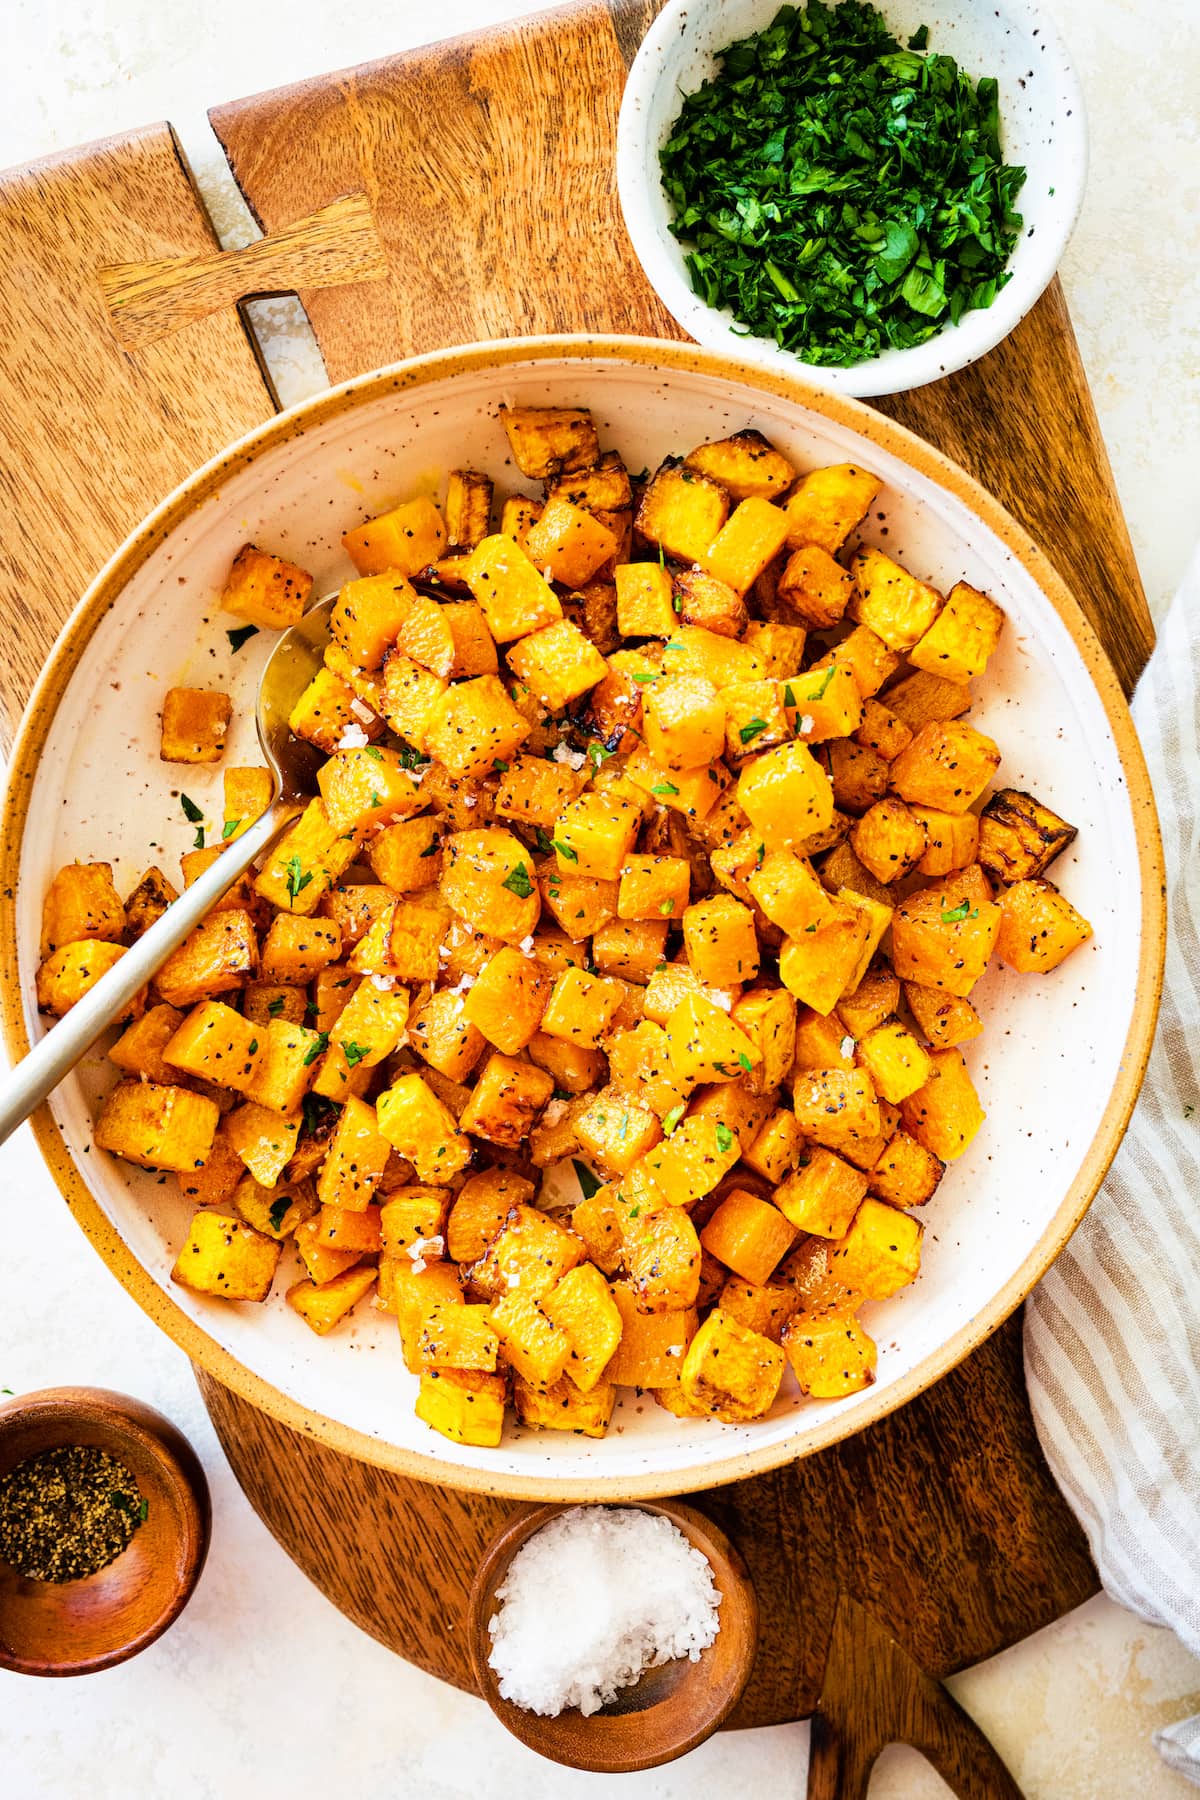 Seasoned and cubed butternut squash on a plate.